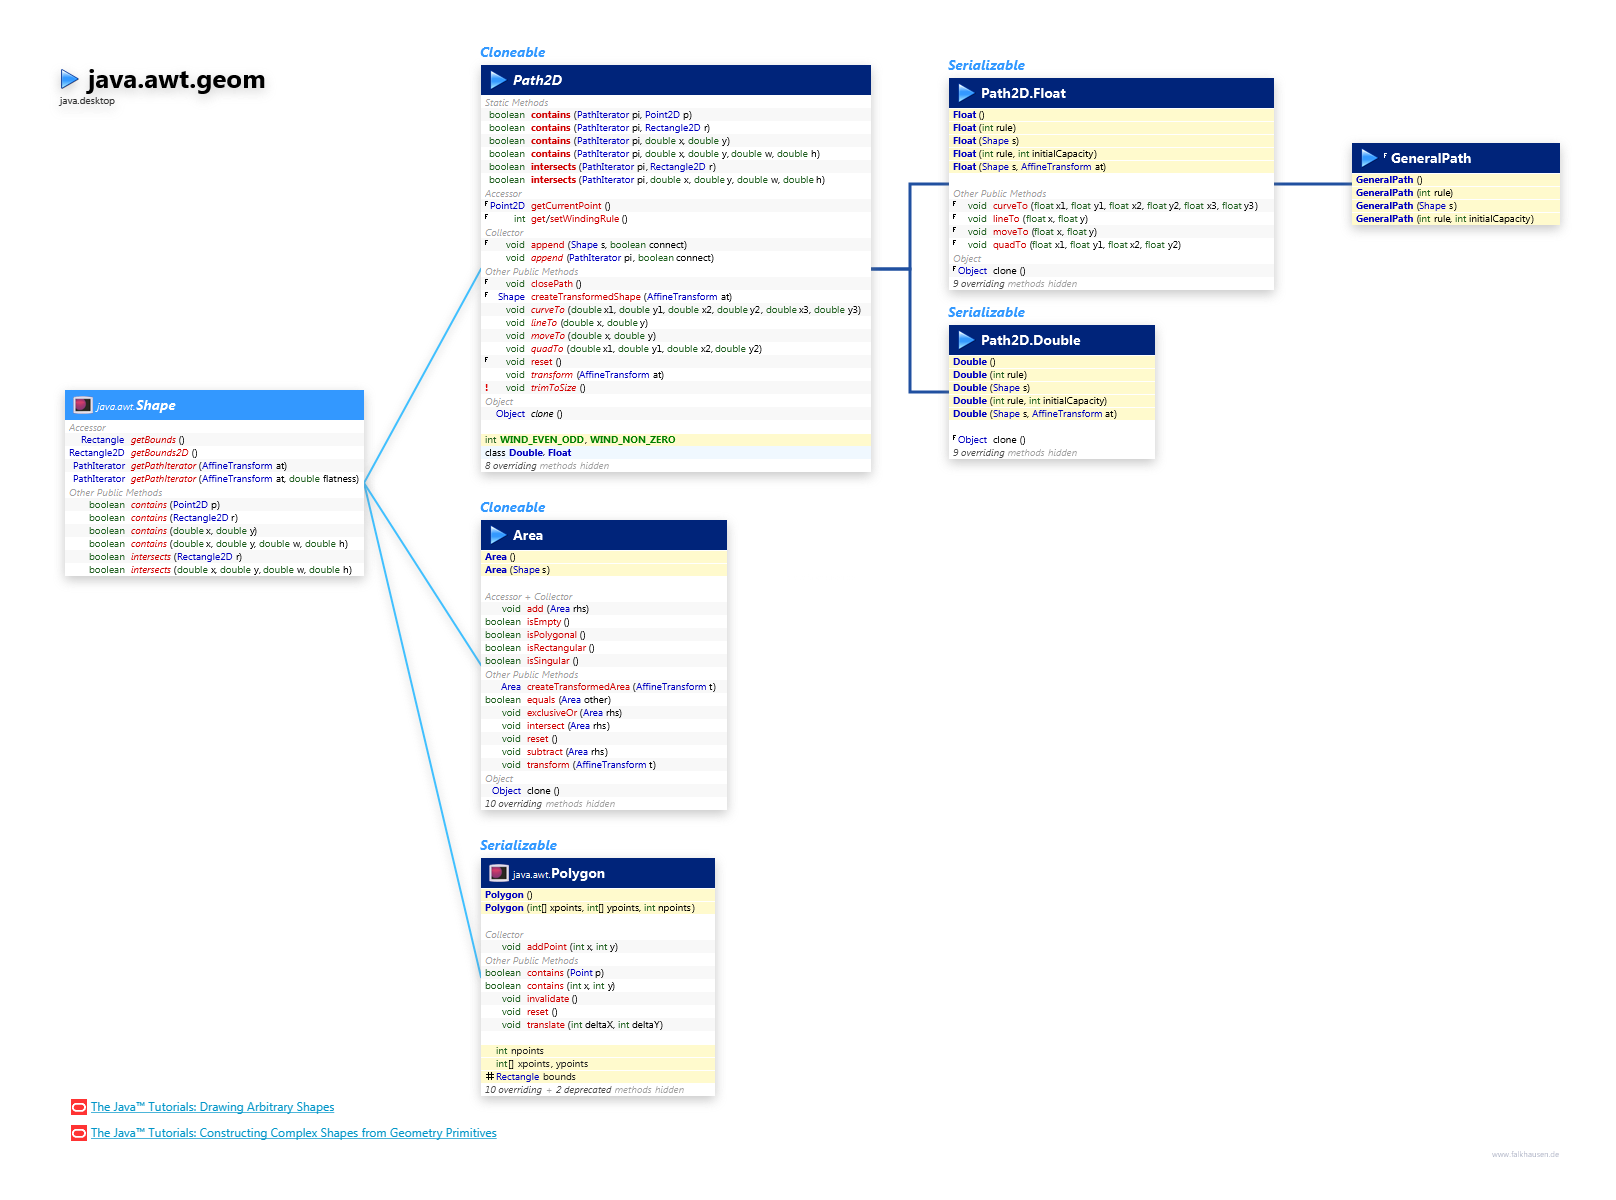 java.awt.geom Misc Shapes class diagram and api documentation for Java 10